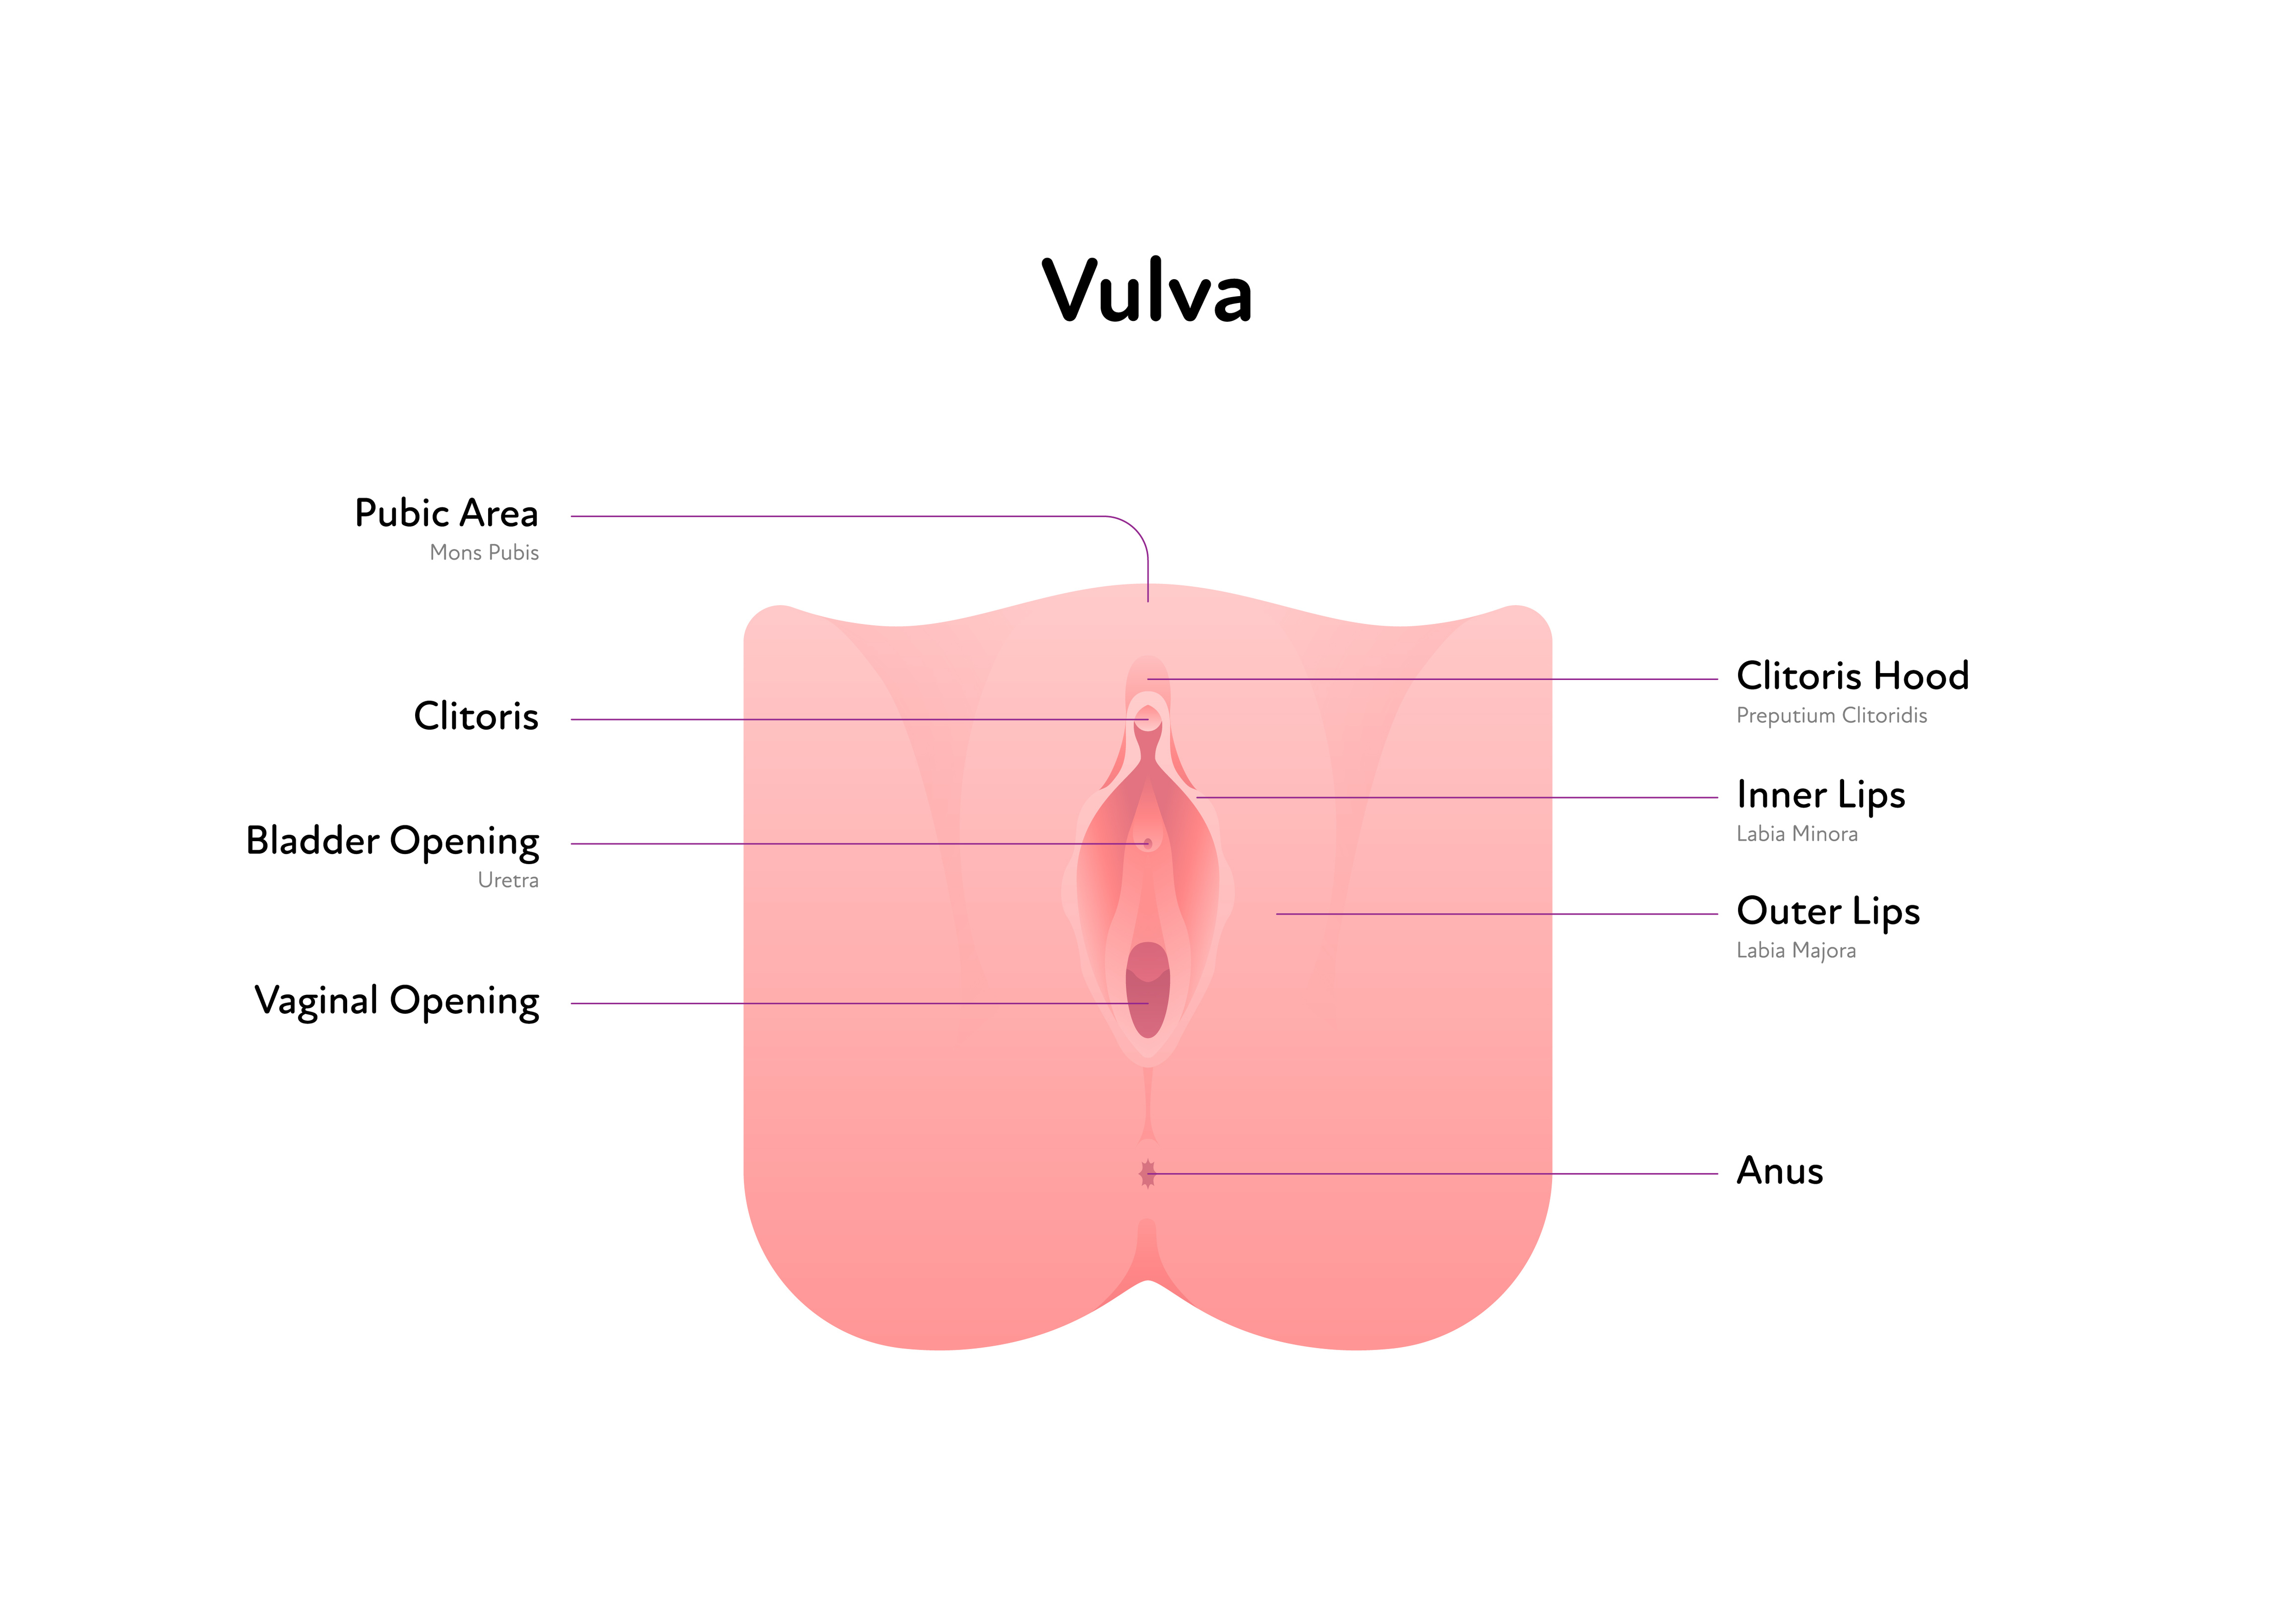 Toddler Vaginal and Vulvar Care: How to Keep It Clean and What to Watch For